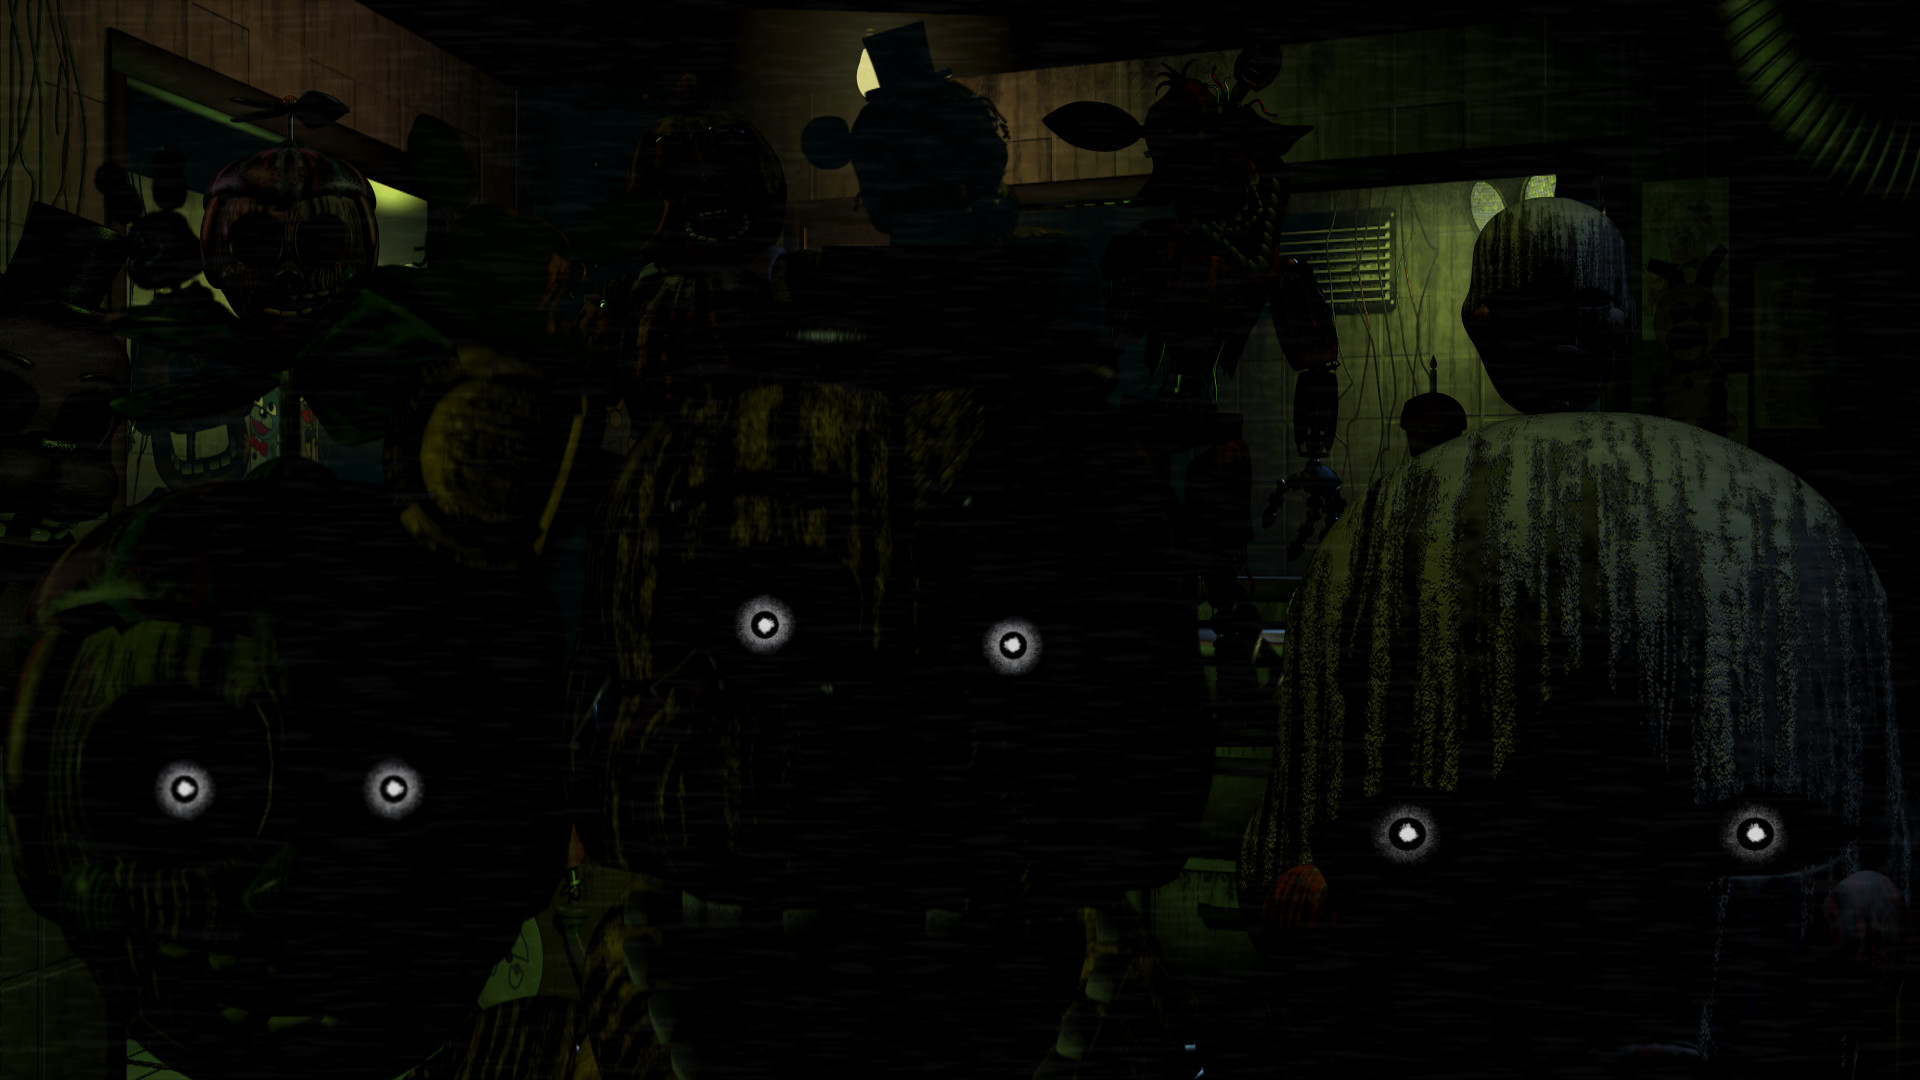 1920x1080 Five Nights at Freddy's Wallpapers